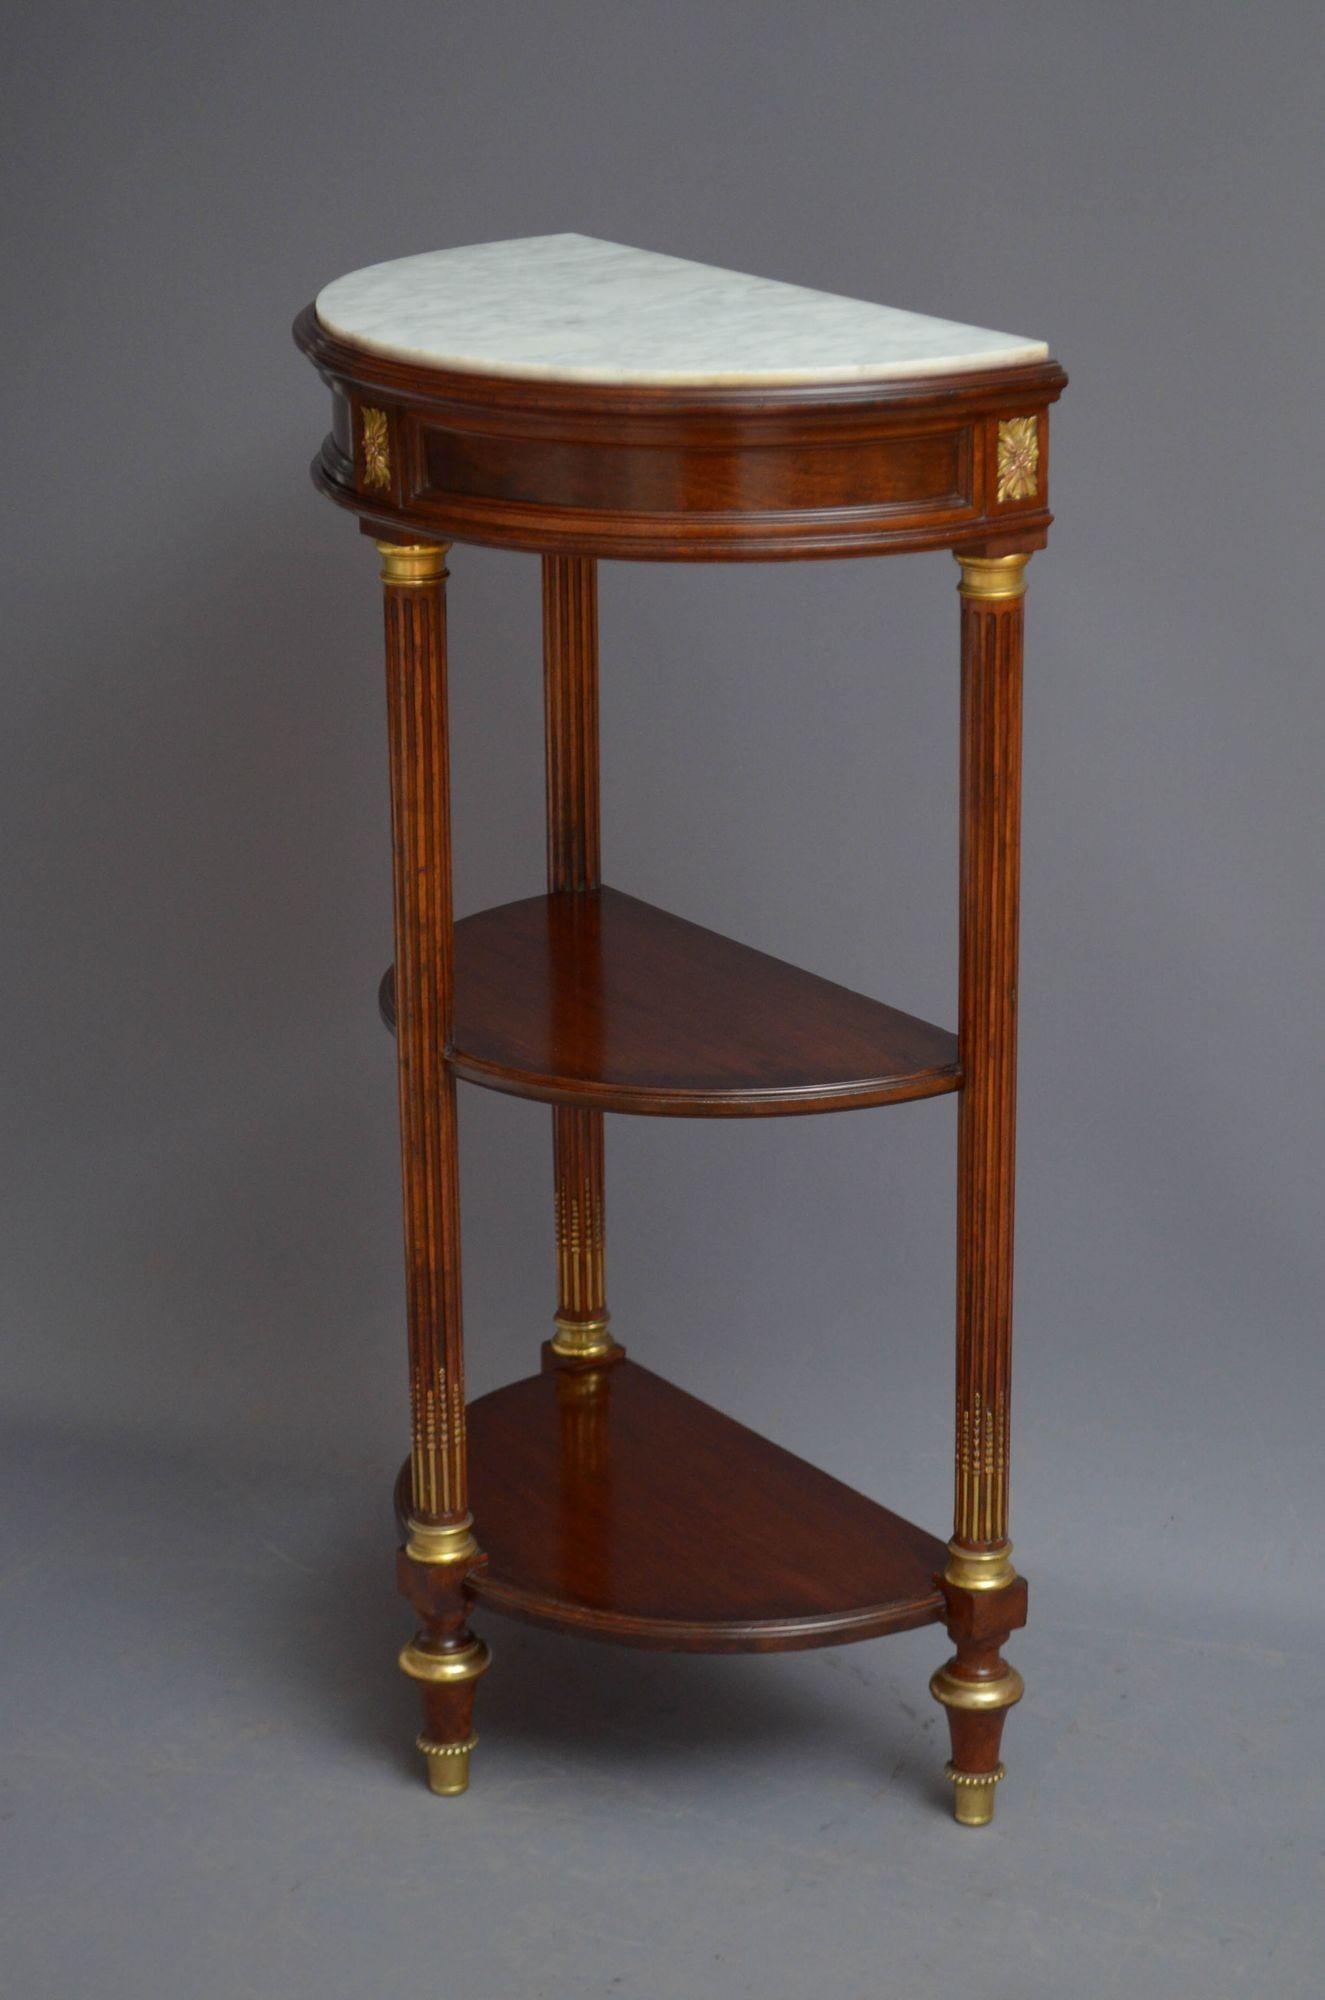 Sn5520 An attractive turn of the century half moon hall table in deep rich mahogany, having original white and veined marble top above a panelled frieze enclosing a secret drawer flanked by ormolu acanthus leaves, all standing on three reeded legs